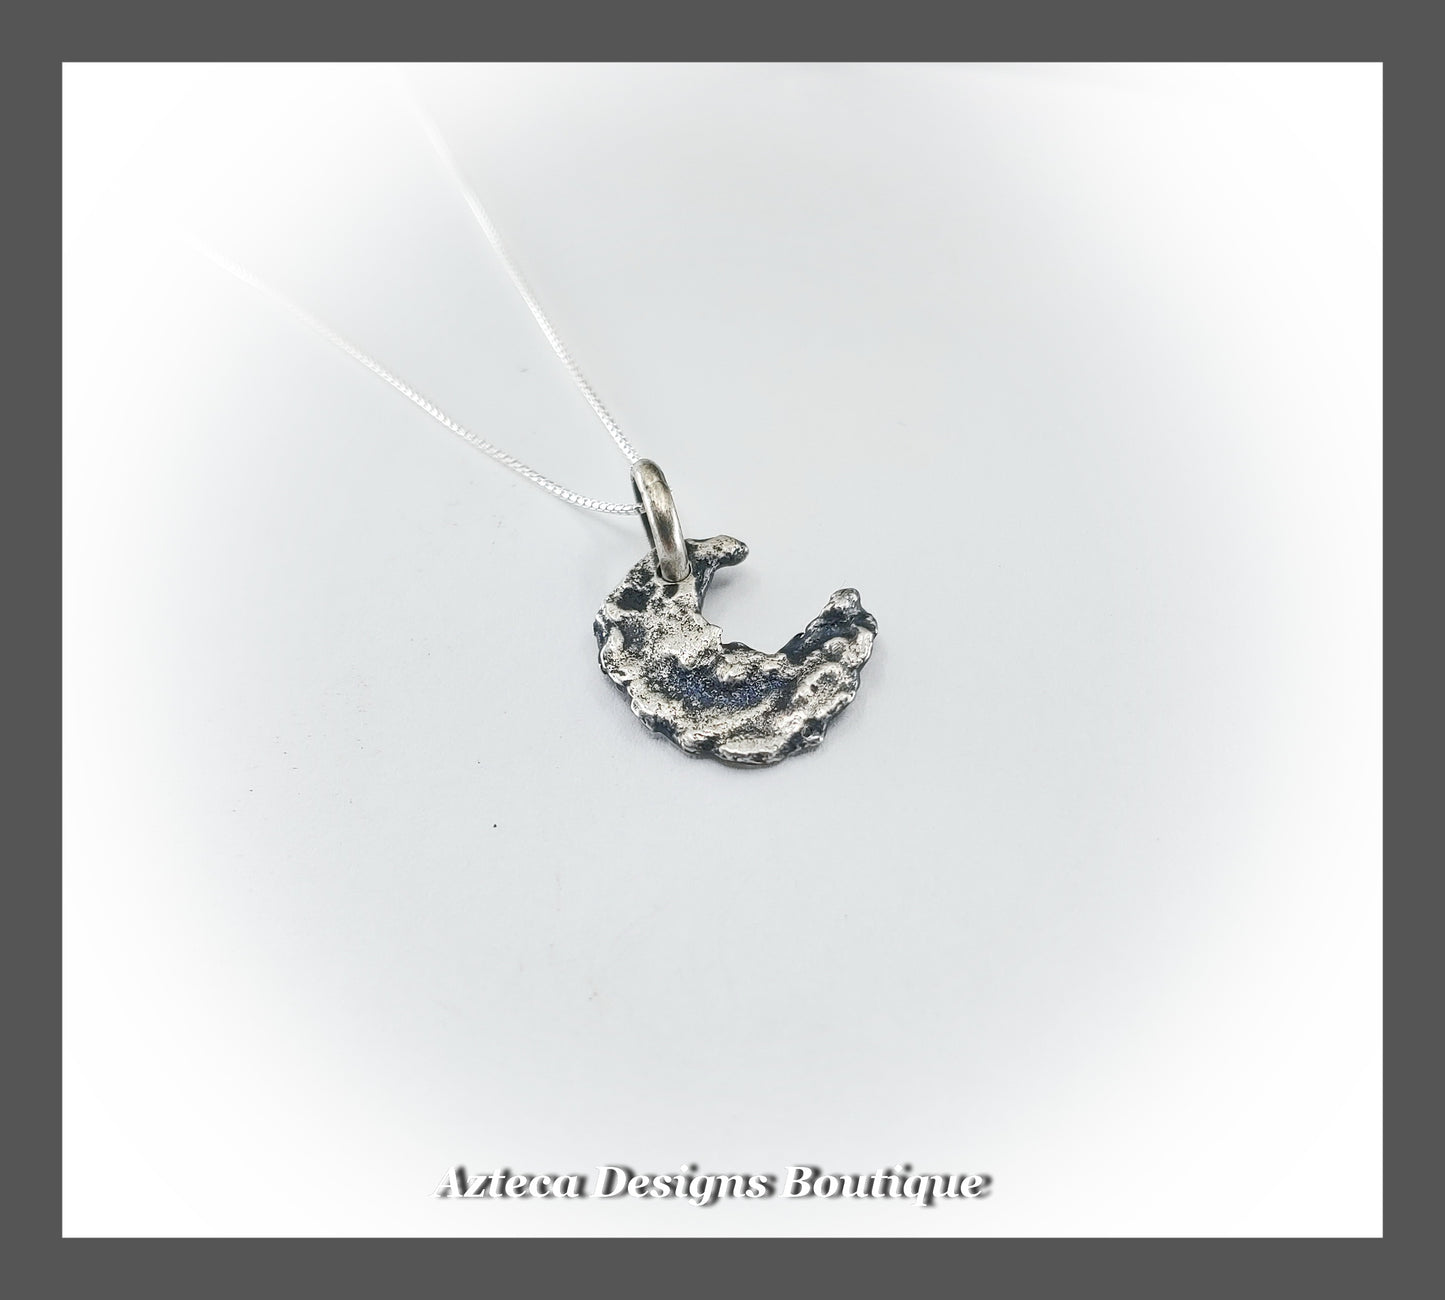 Rustic Forged Sterling Silver Moon Necklace